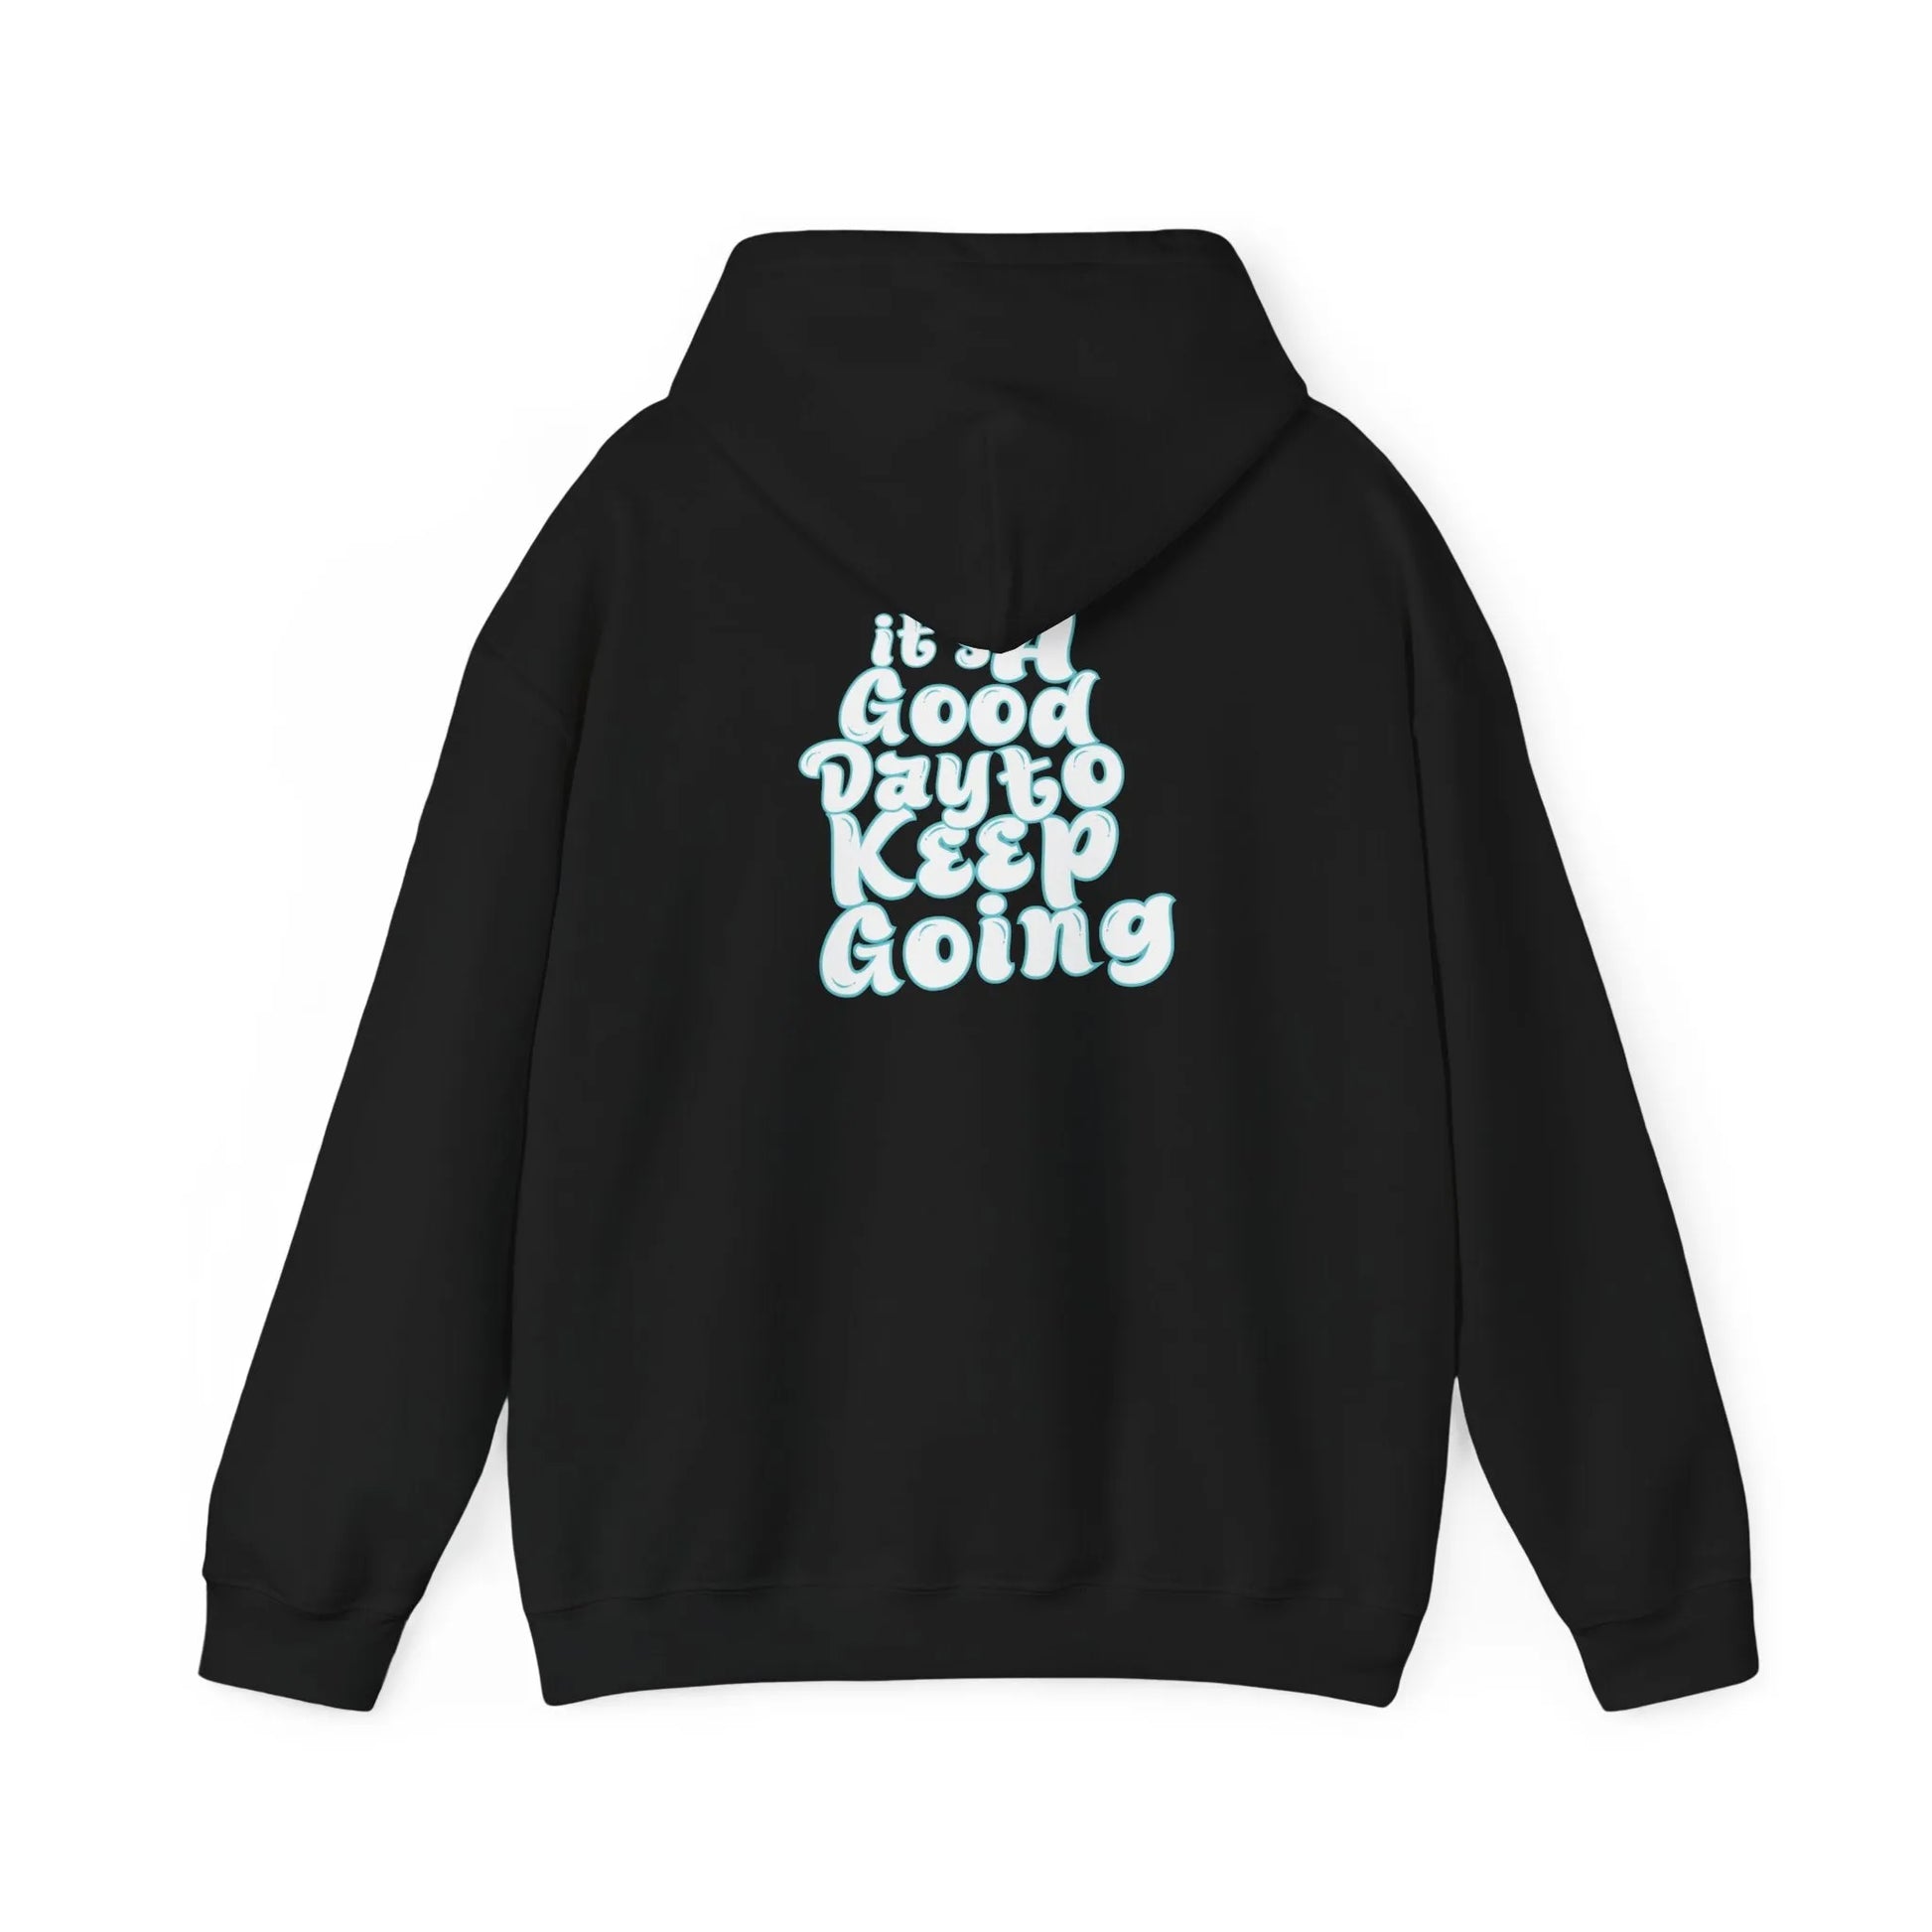 It's A Good Day To Keep Going Hoodie TurquoiseIt's A Good Day To Keep Going Hoodie Turquoise